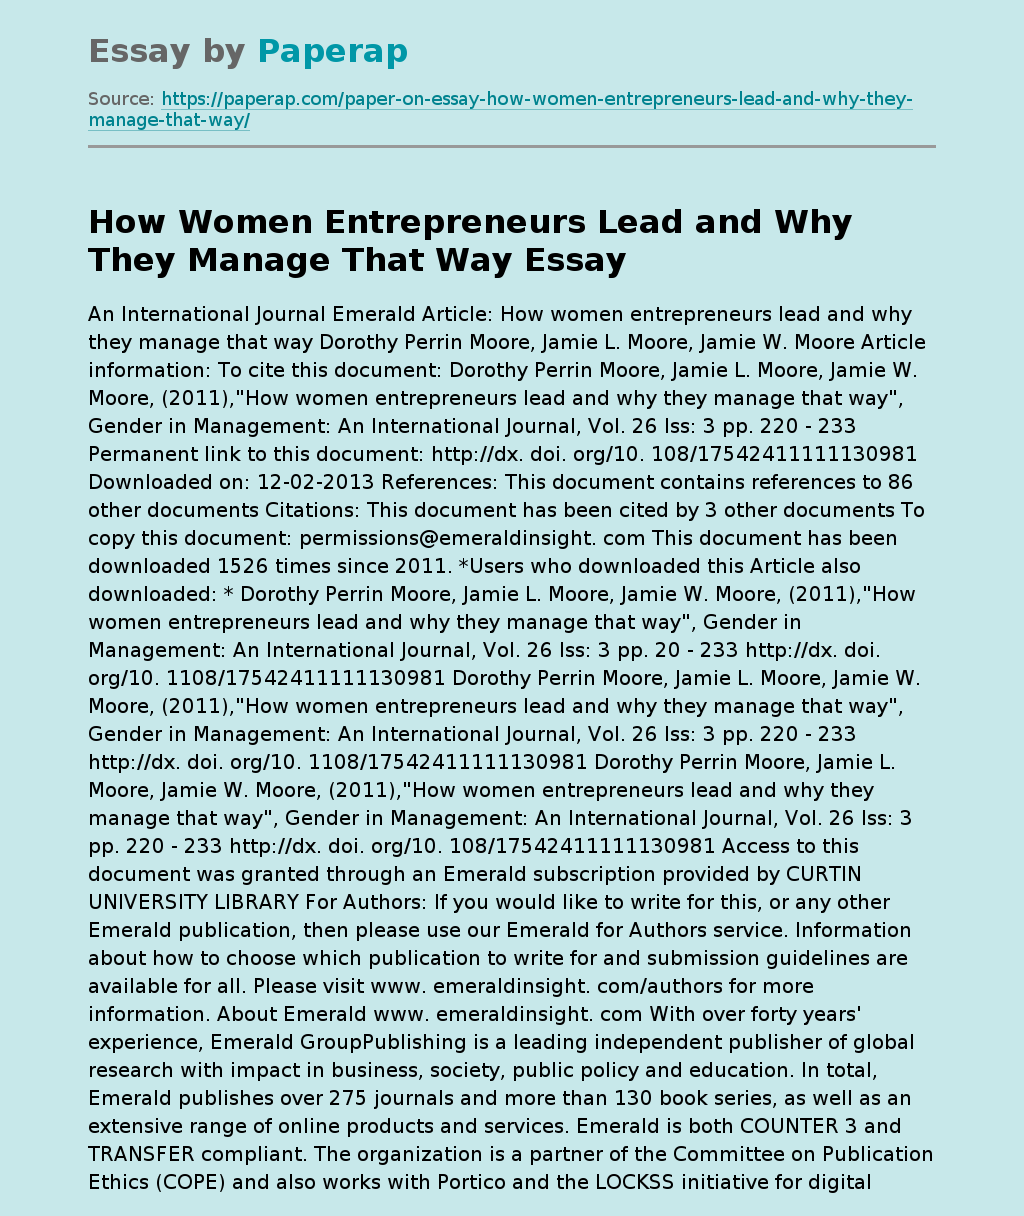 How Women Entrepreneurs Lead and Why They Manage That Way